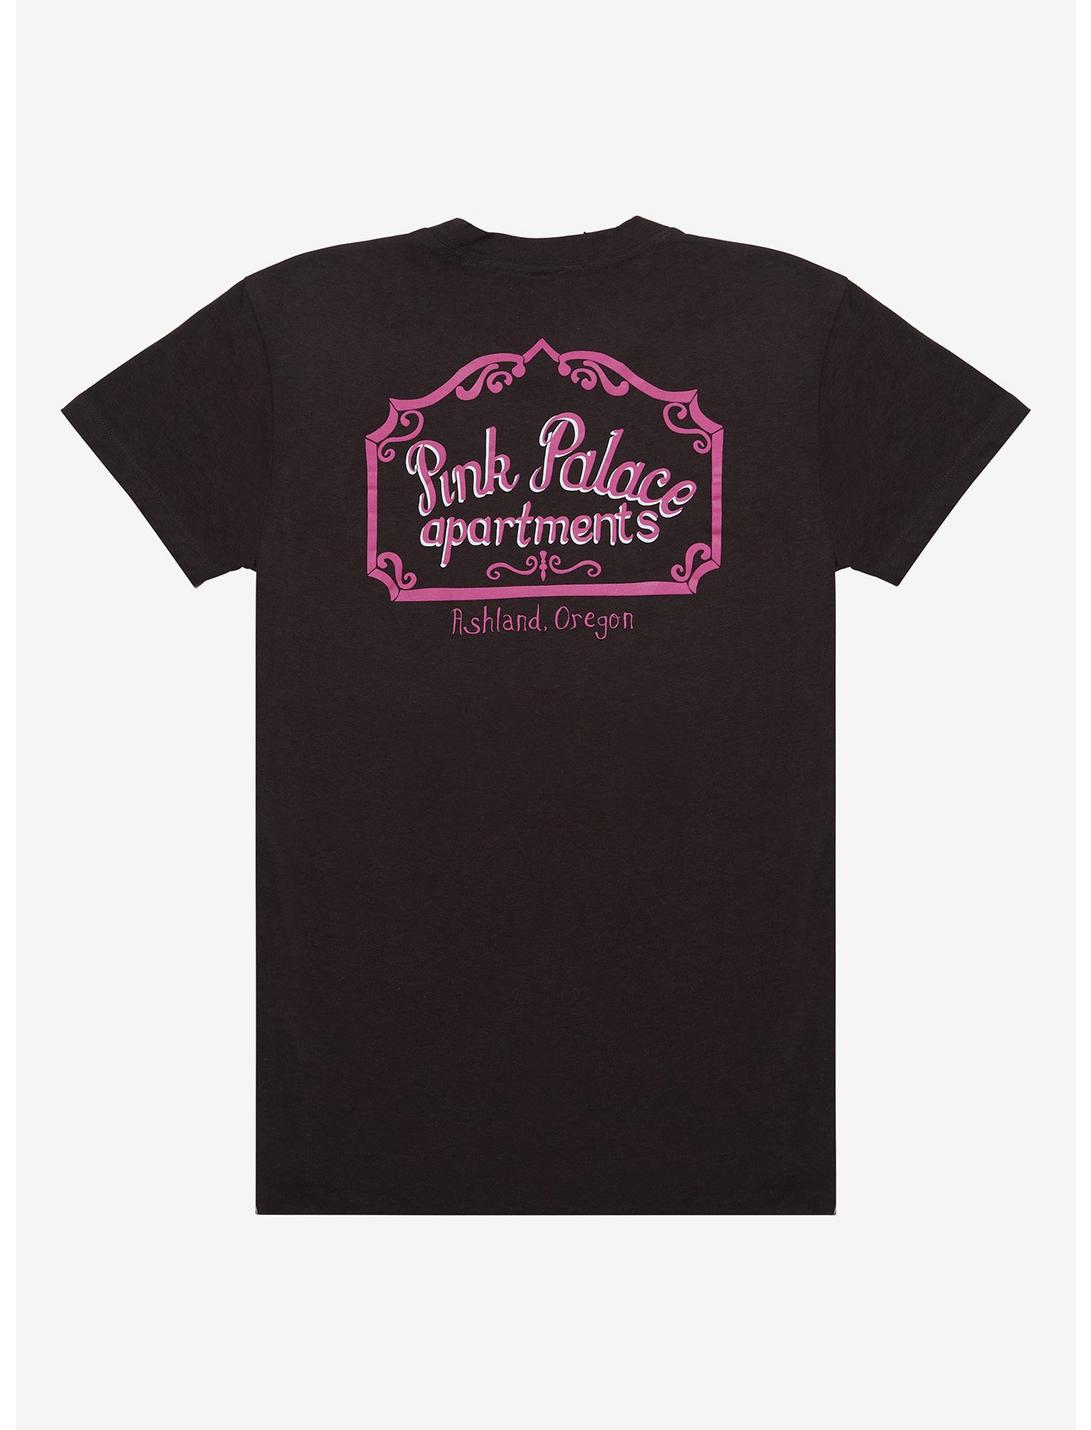 Coraline Pink Palace Apartments T-Shirt - BoxLunch Exclusive, PINK, hi-res